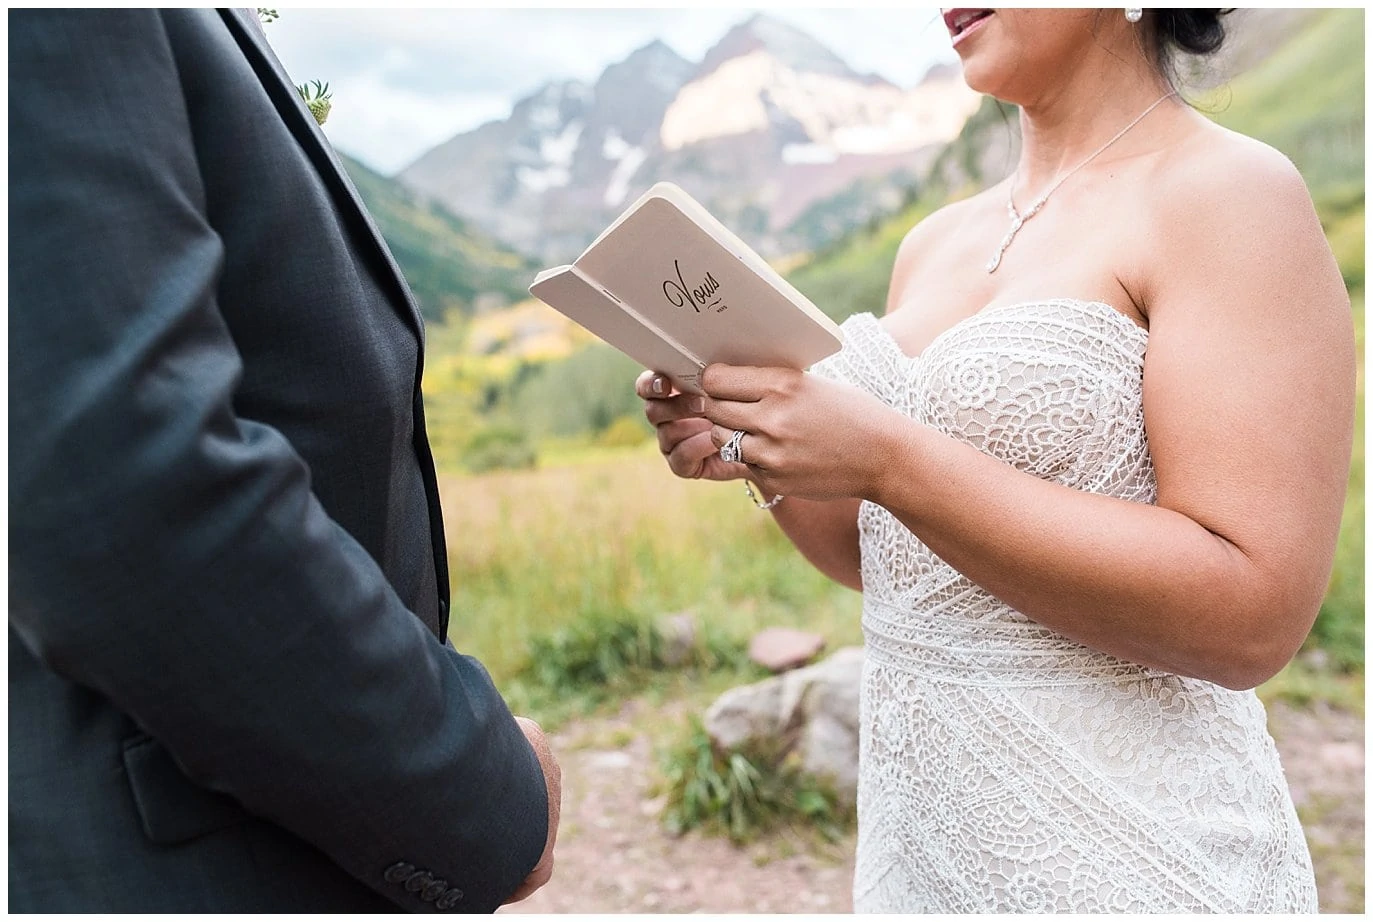 saying personal vows during elopement photo